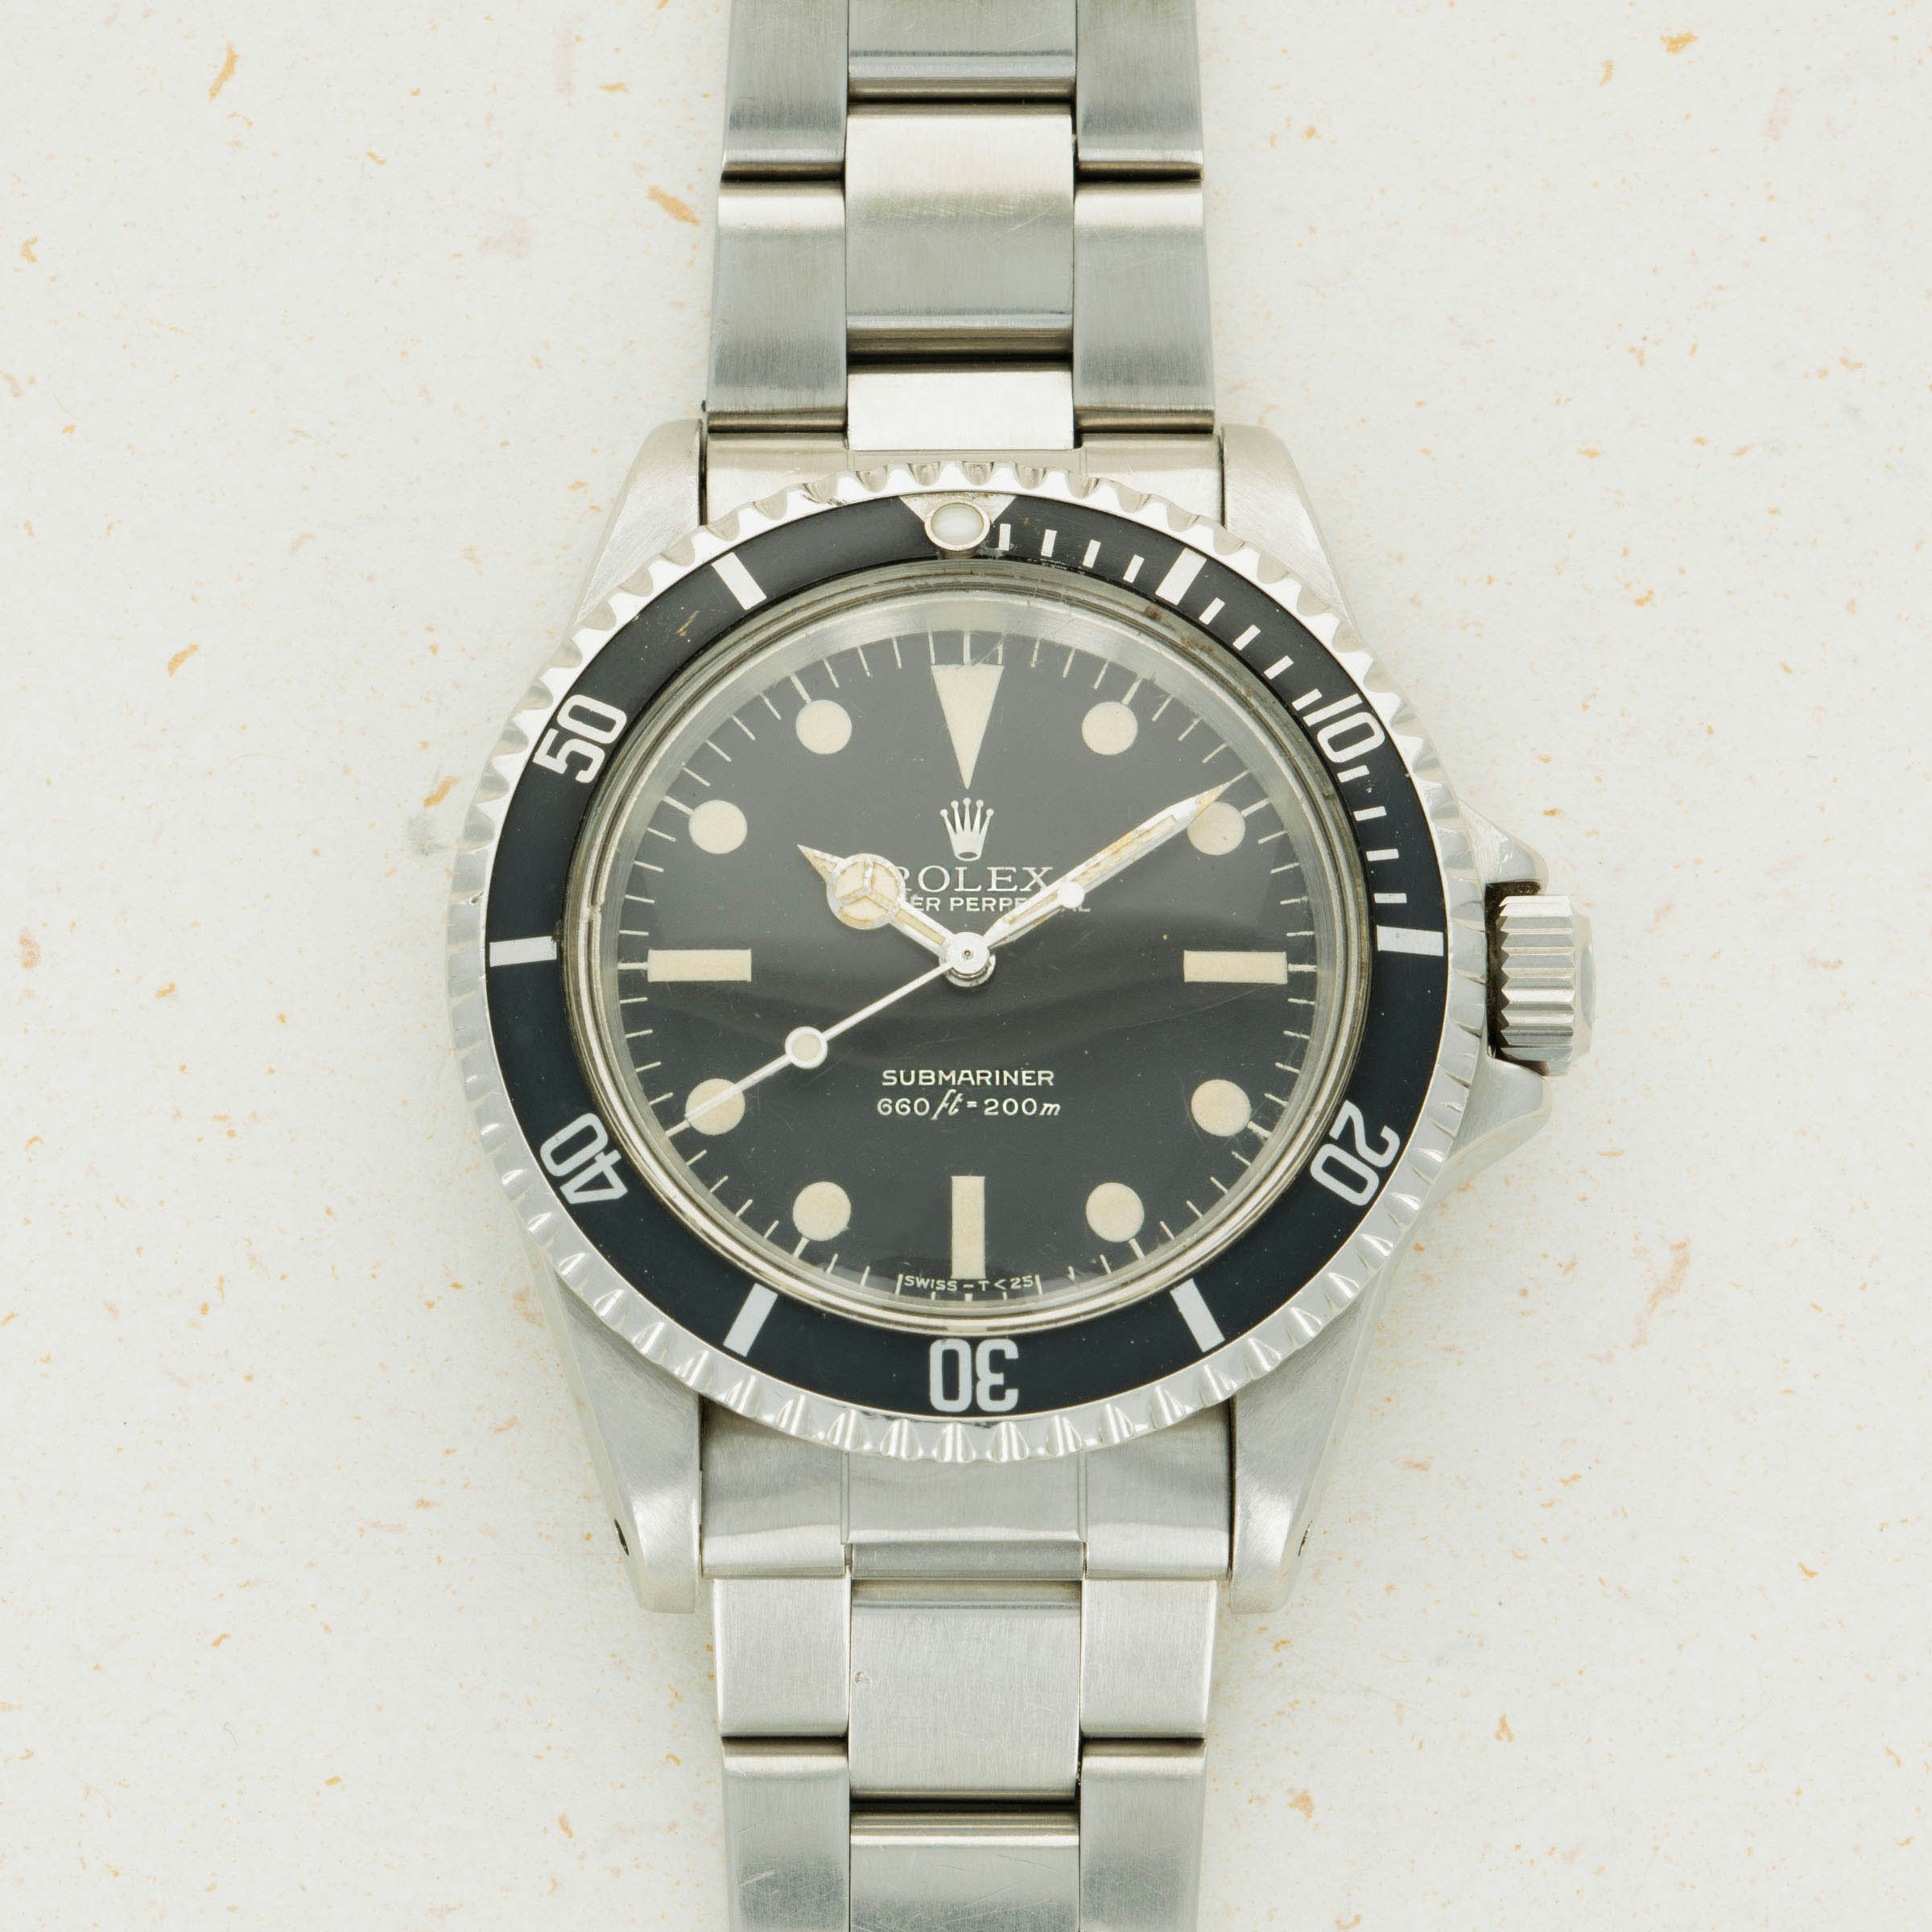 Thumbnail for Rolex Submariner 5513 Maxi Service Dial